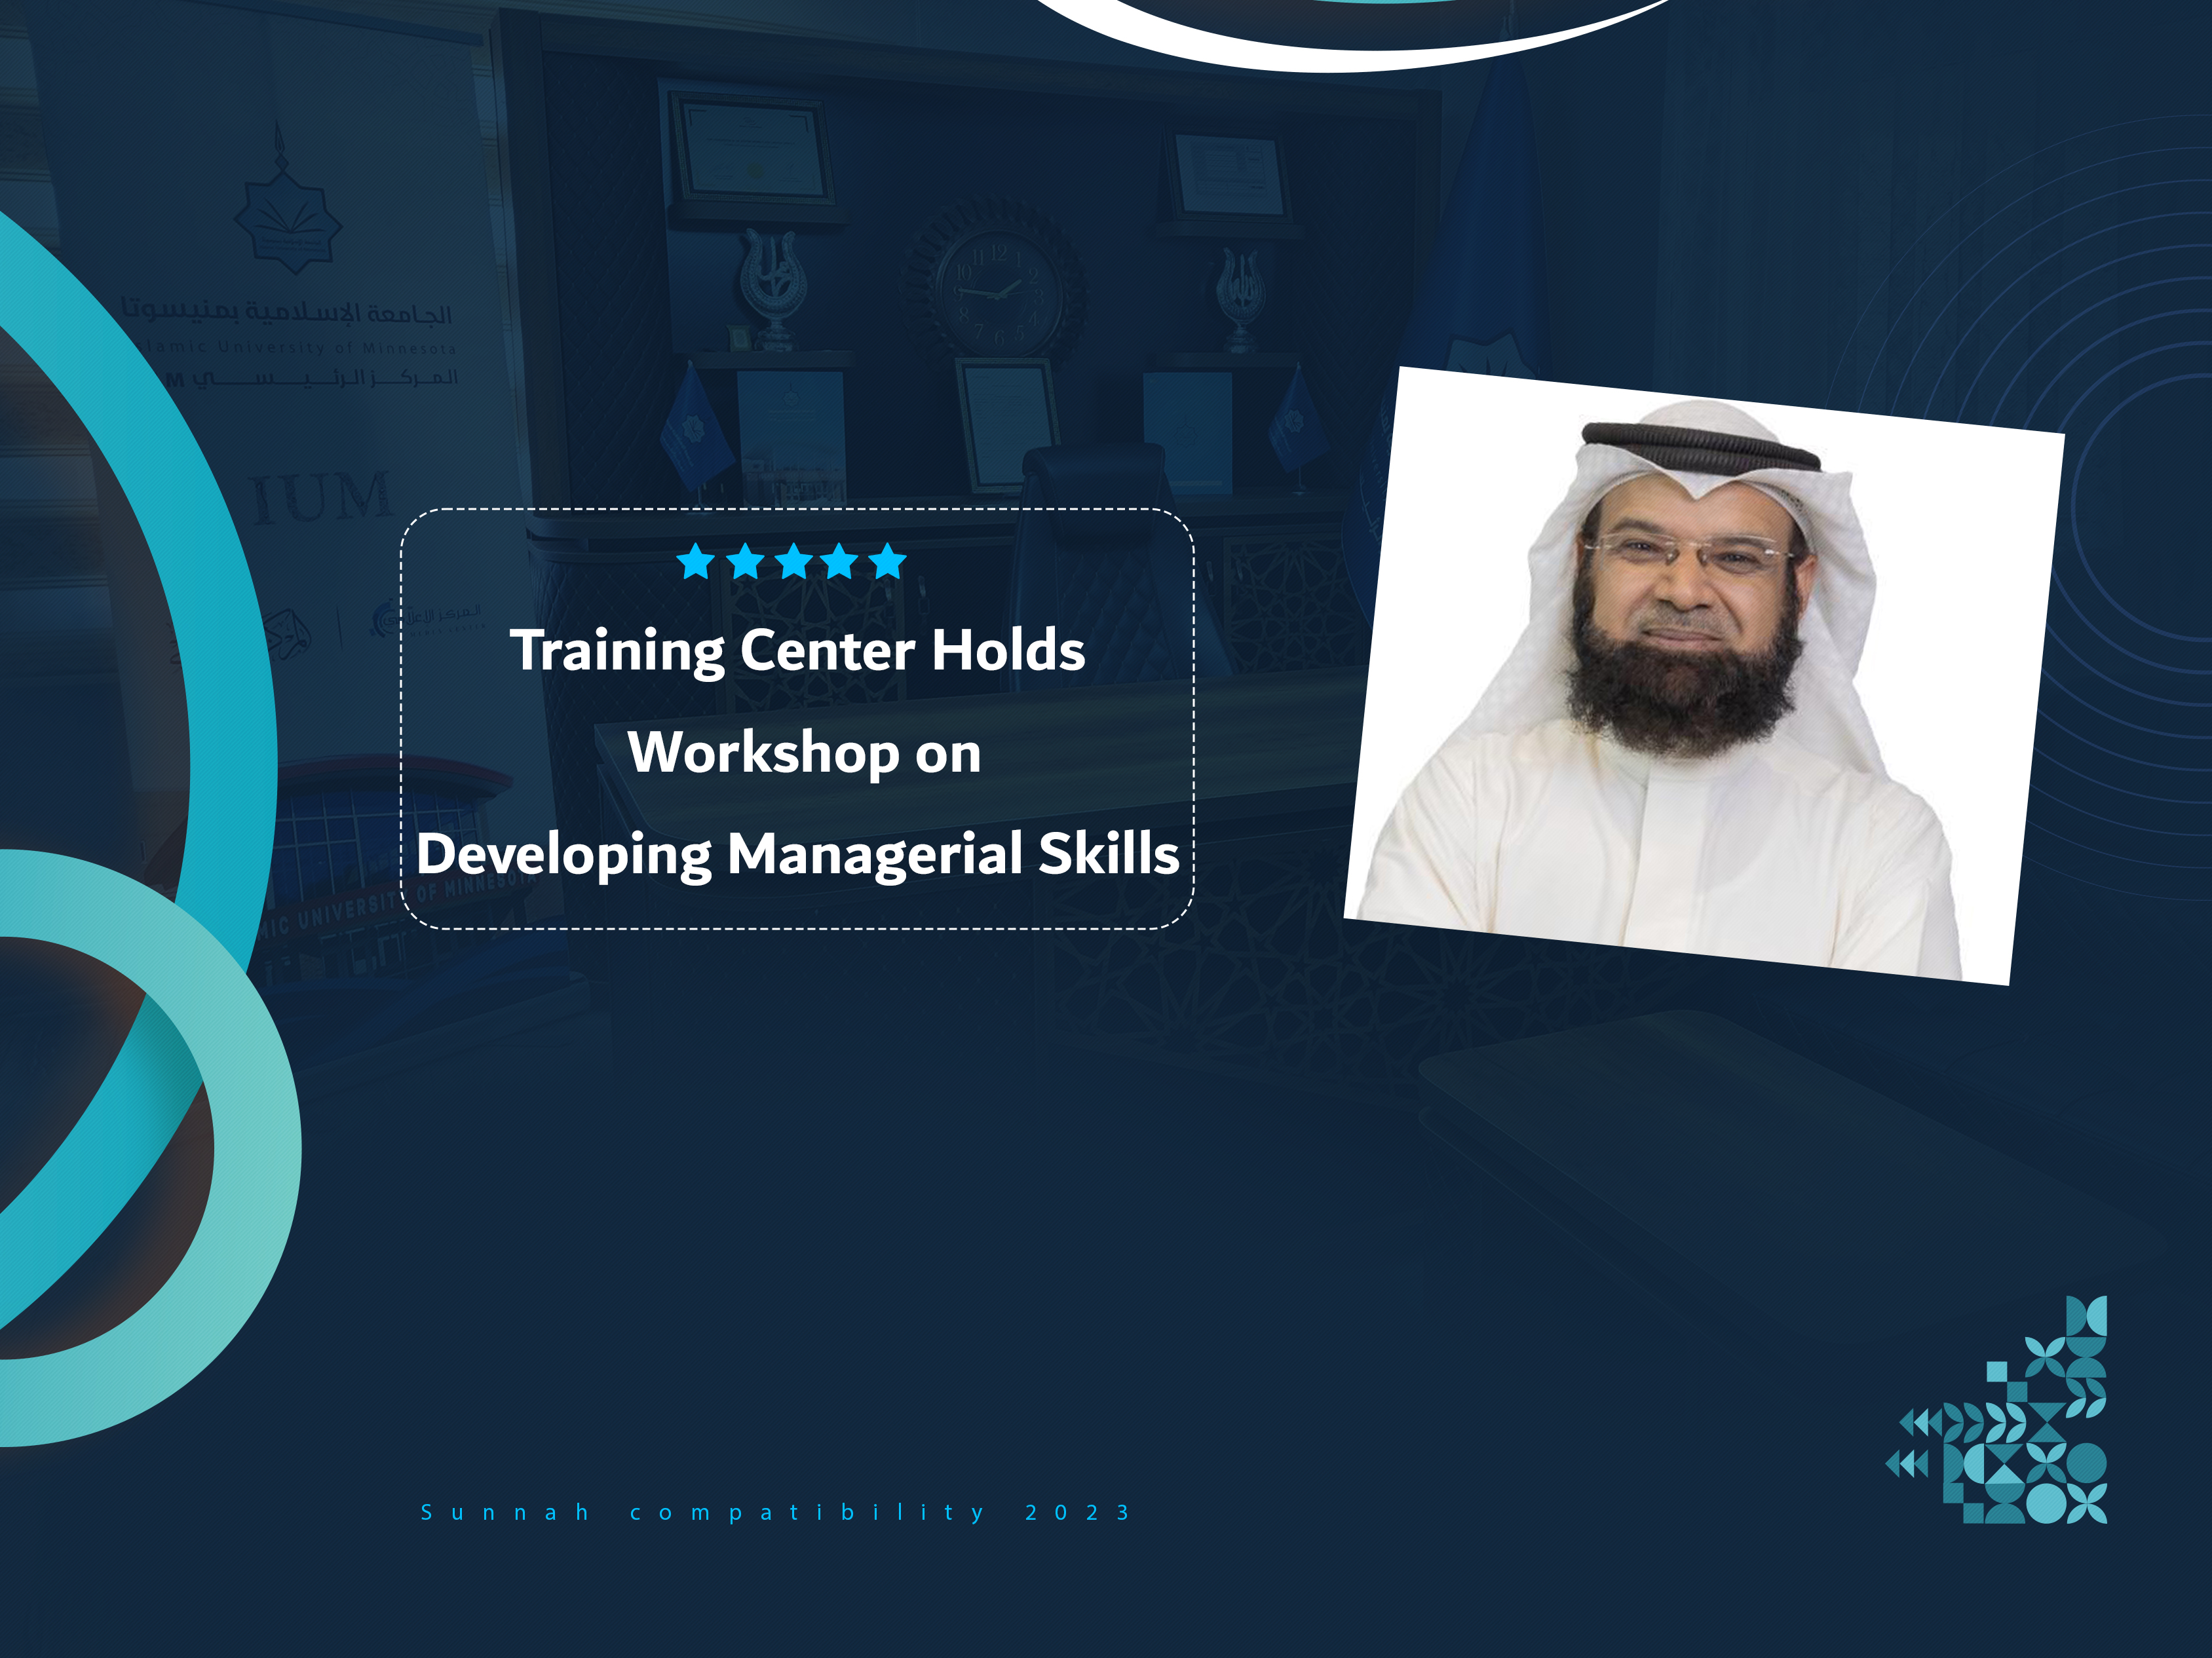 Training Center Holds Workshop on Developing Managerial Skills